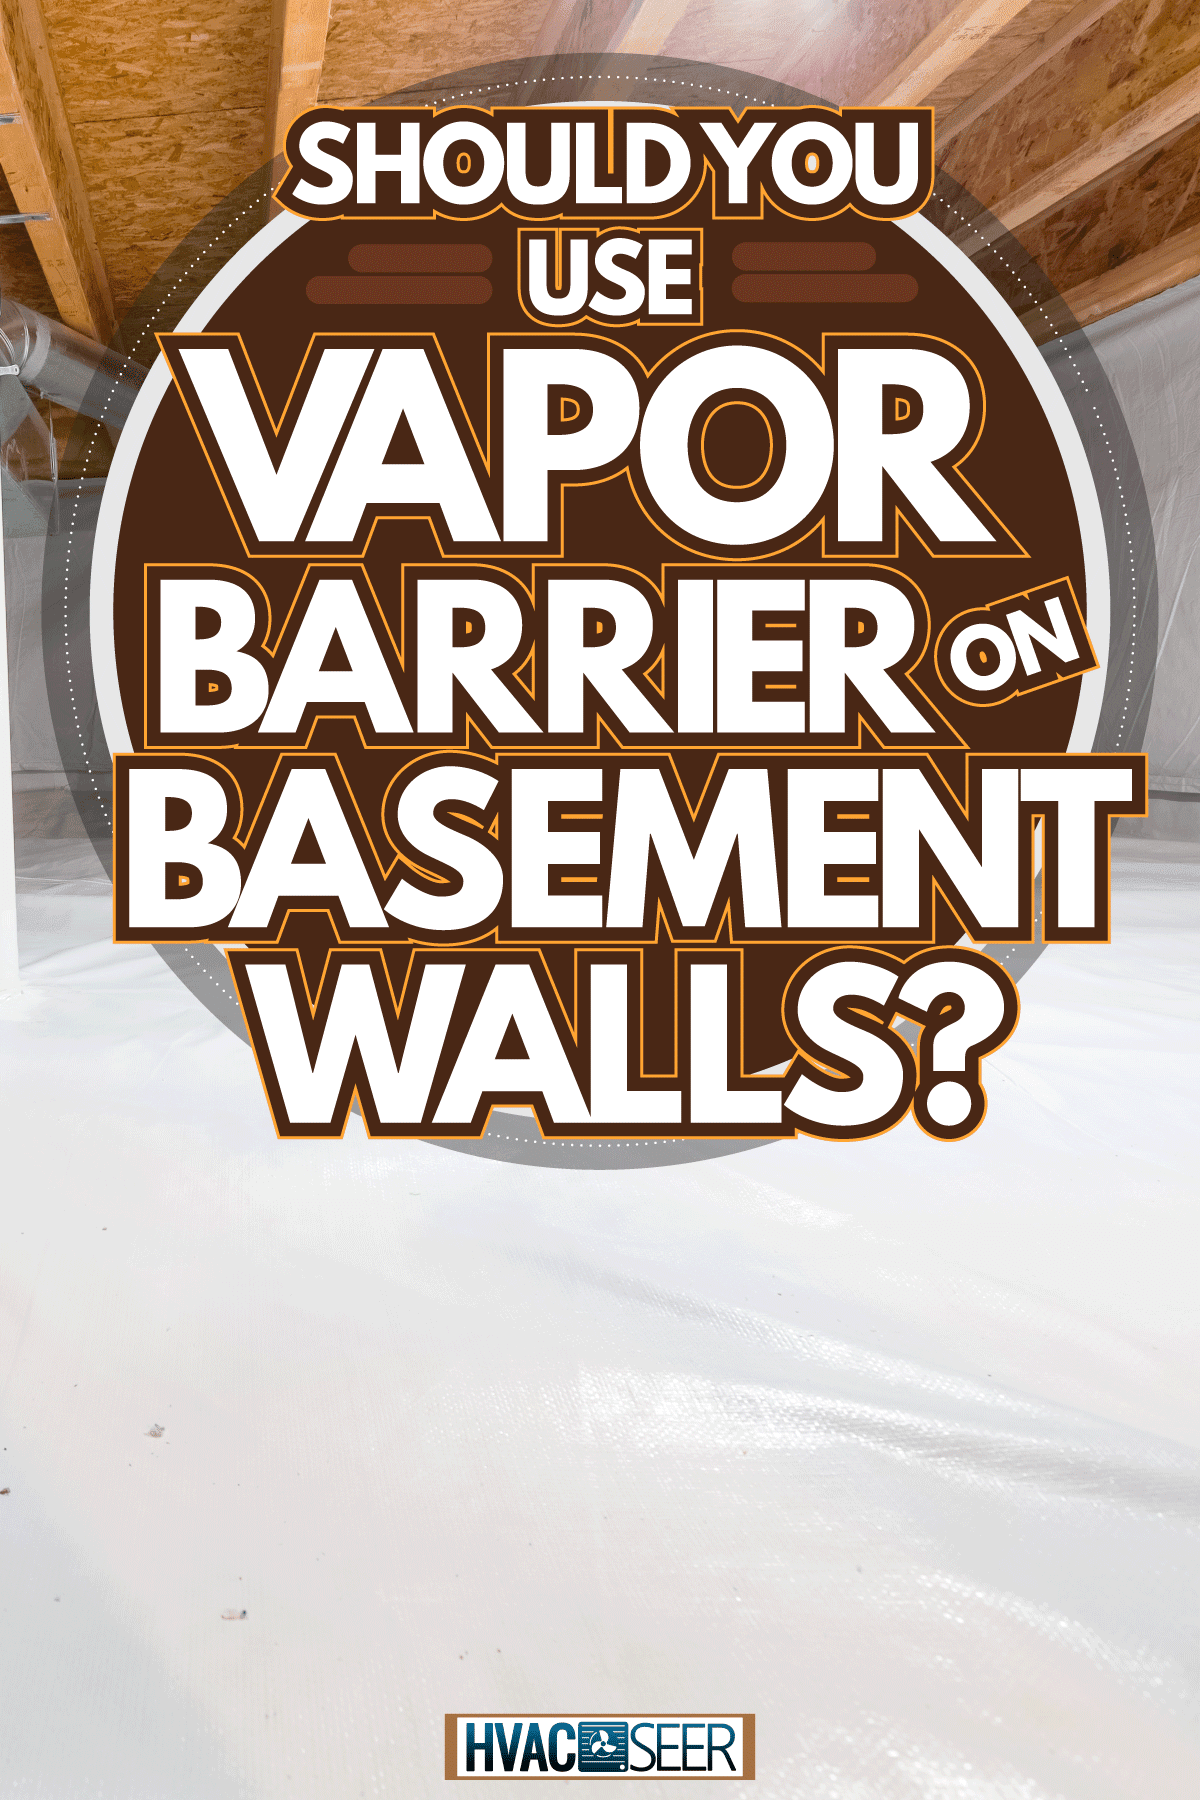 Crawl space fully encapsulated with thermoregulatory blankets and dimple board and pipes in basement location, Should You Use Vapor Barrier On Basement Walls?